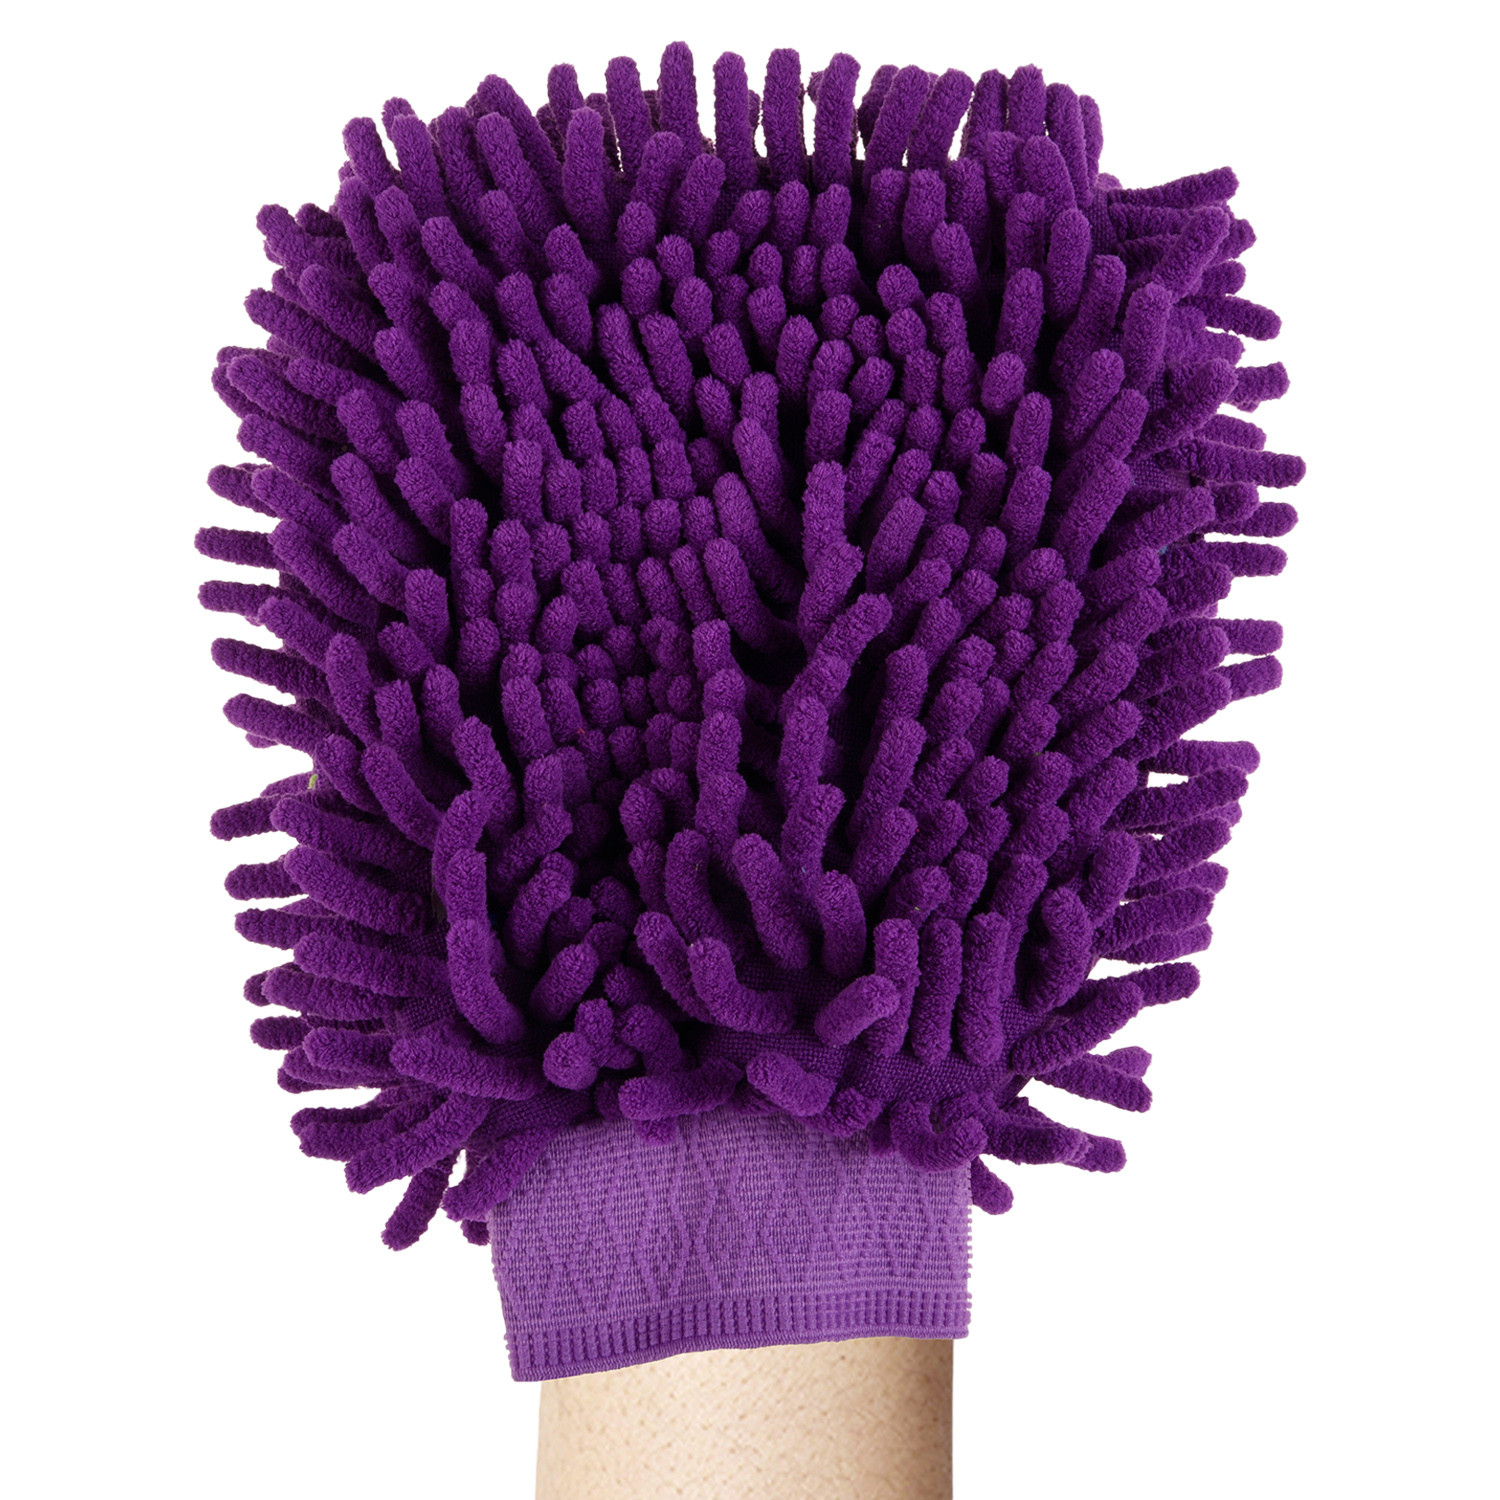 Kuber Industries Chenille Mitts|Microfiber Cleaning Gloves|Inside Waterproof Cloth Gloves|100 Gram Weighted Hand Duster|Chenille Gloves For Car|Glass|Pack of 2 (Purple & Pink)